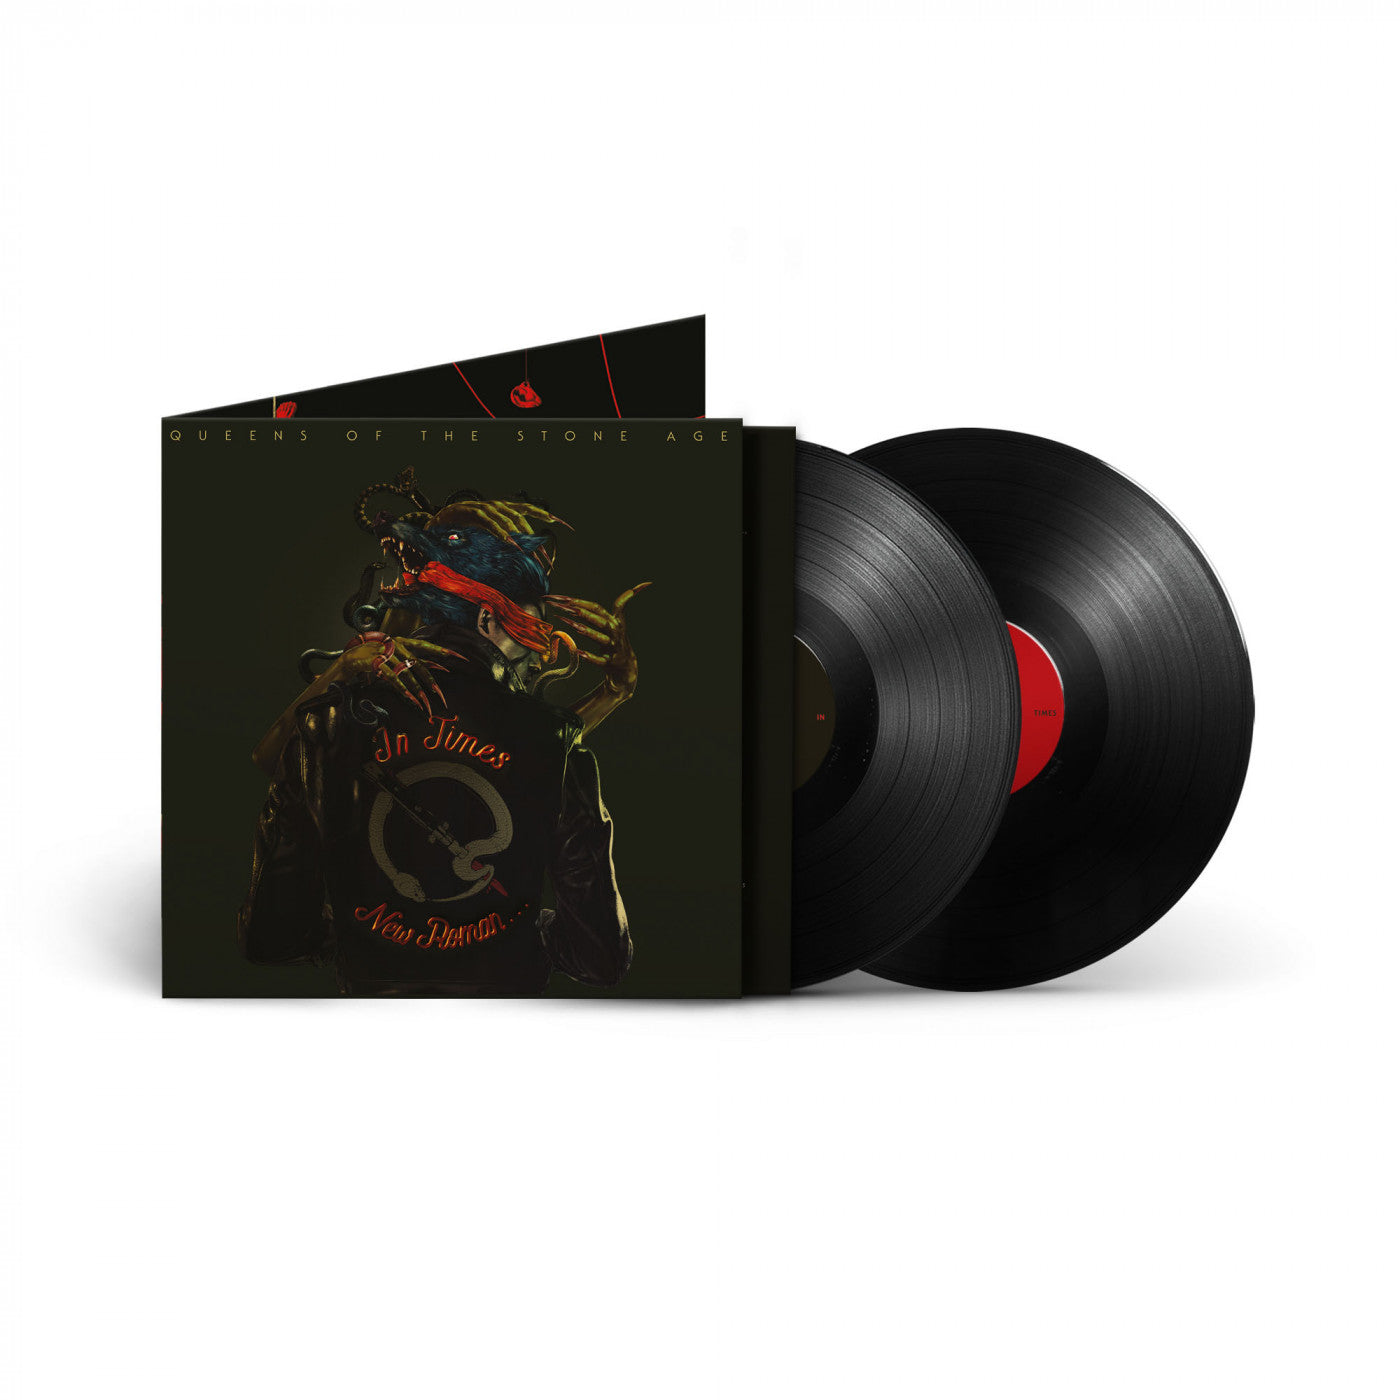 Queens of the Stone Age | In Times New Roman... | Vinyl